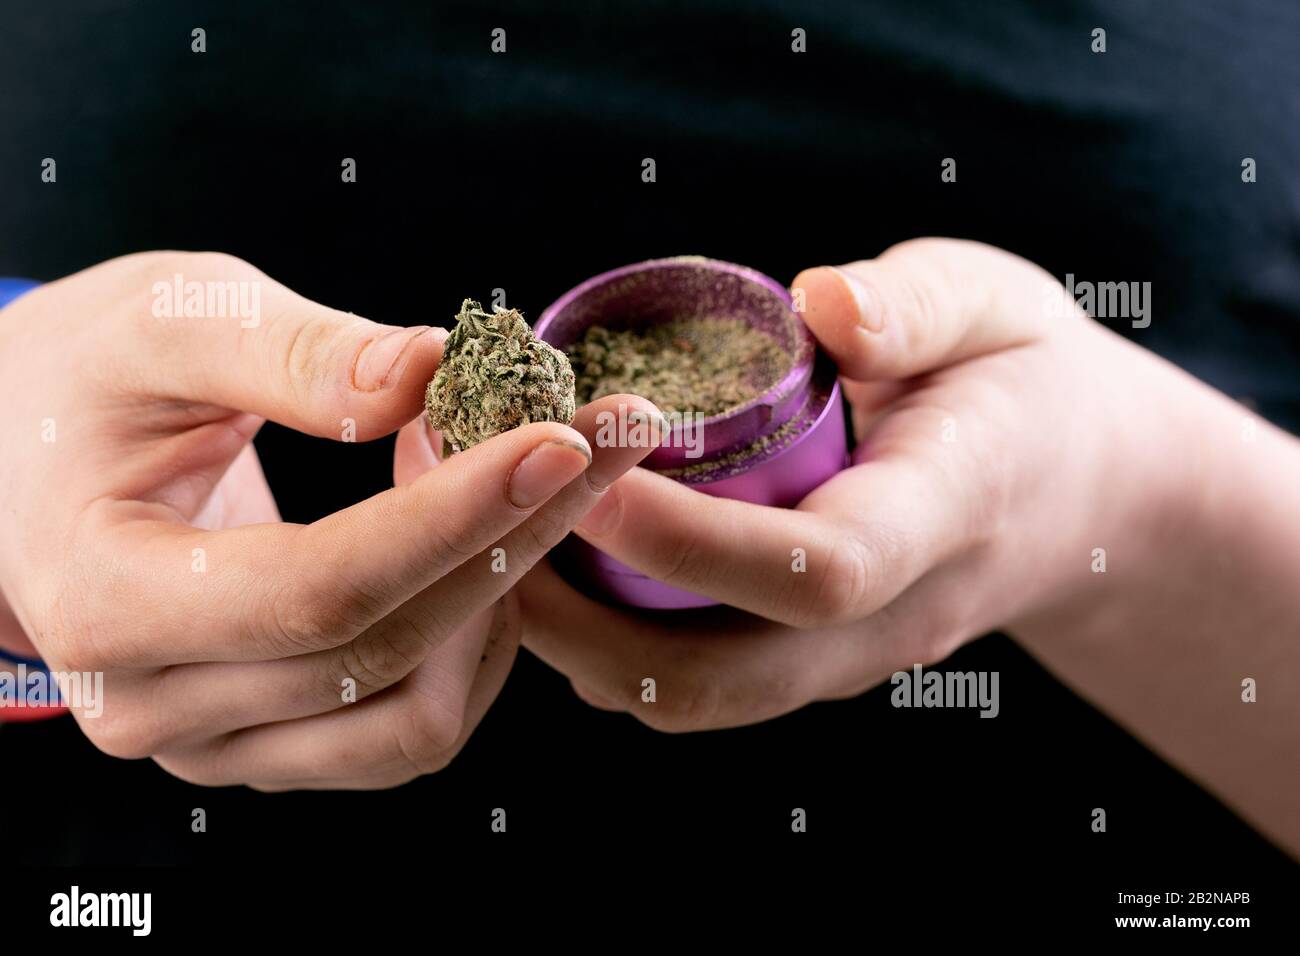 Person Holding Dried Cannabis Flower or Bud Stock Photo